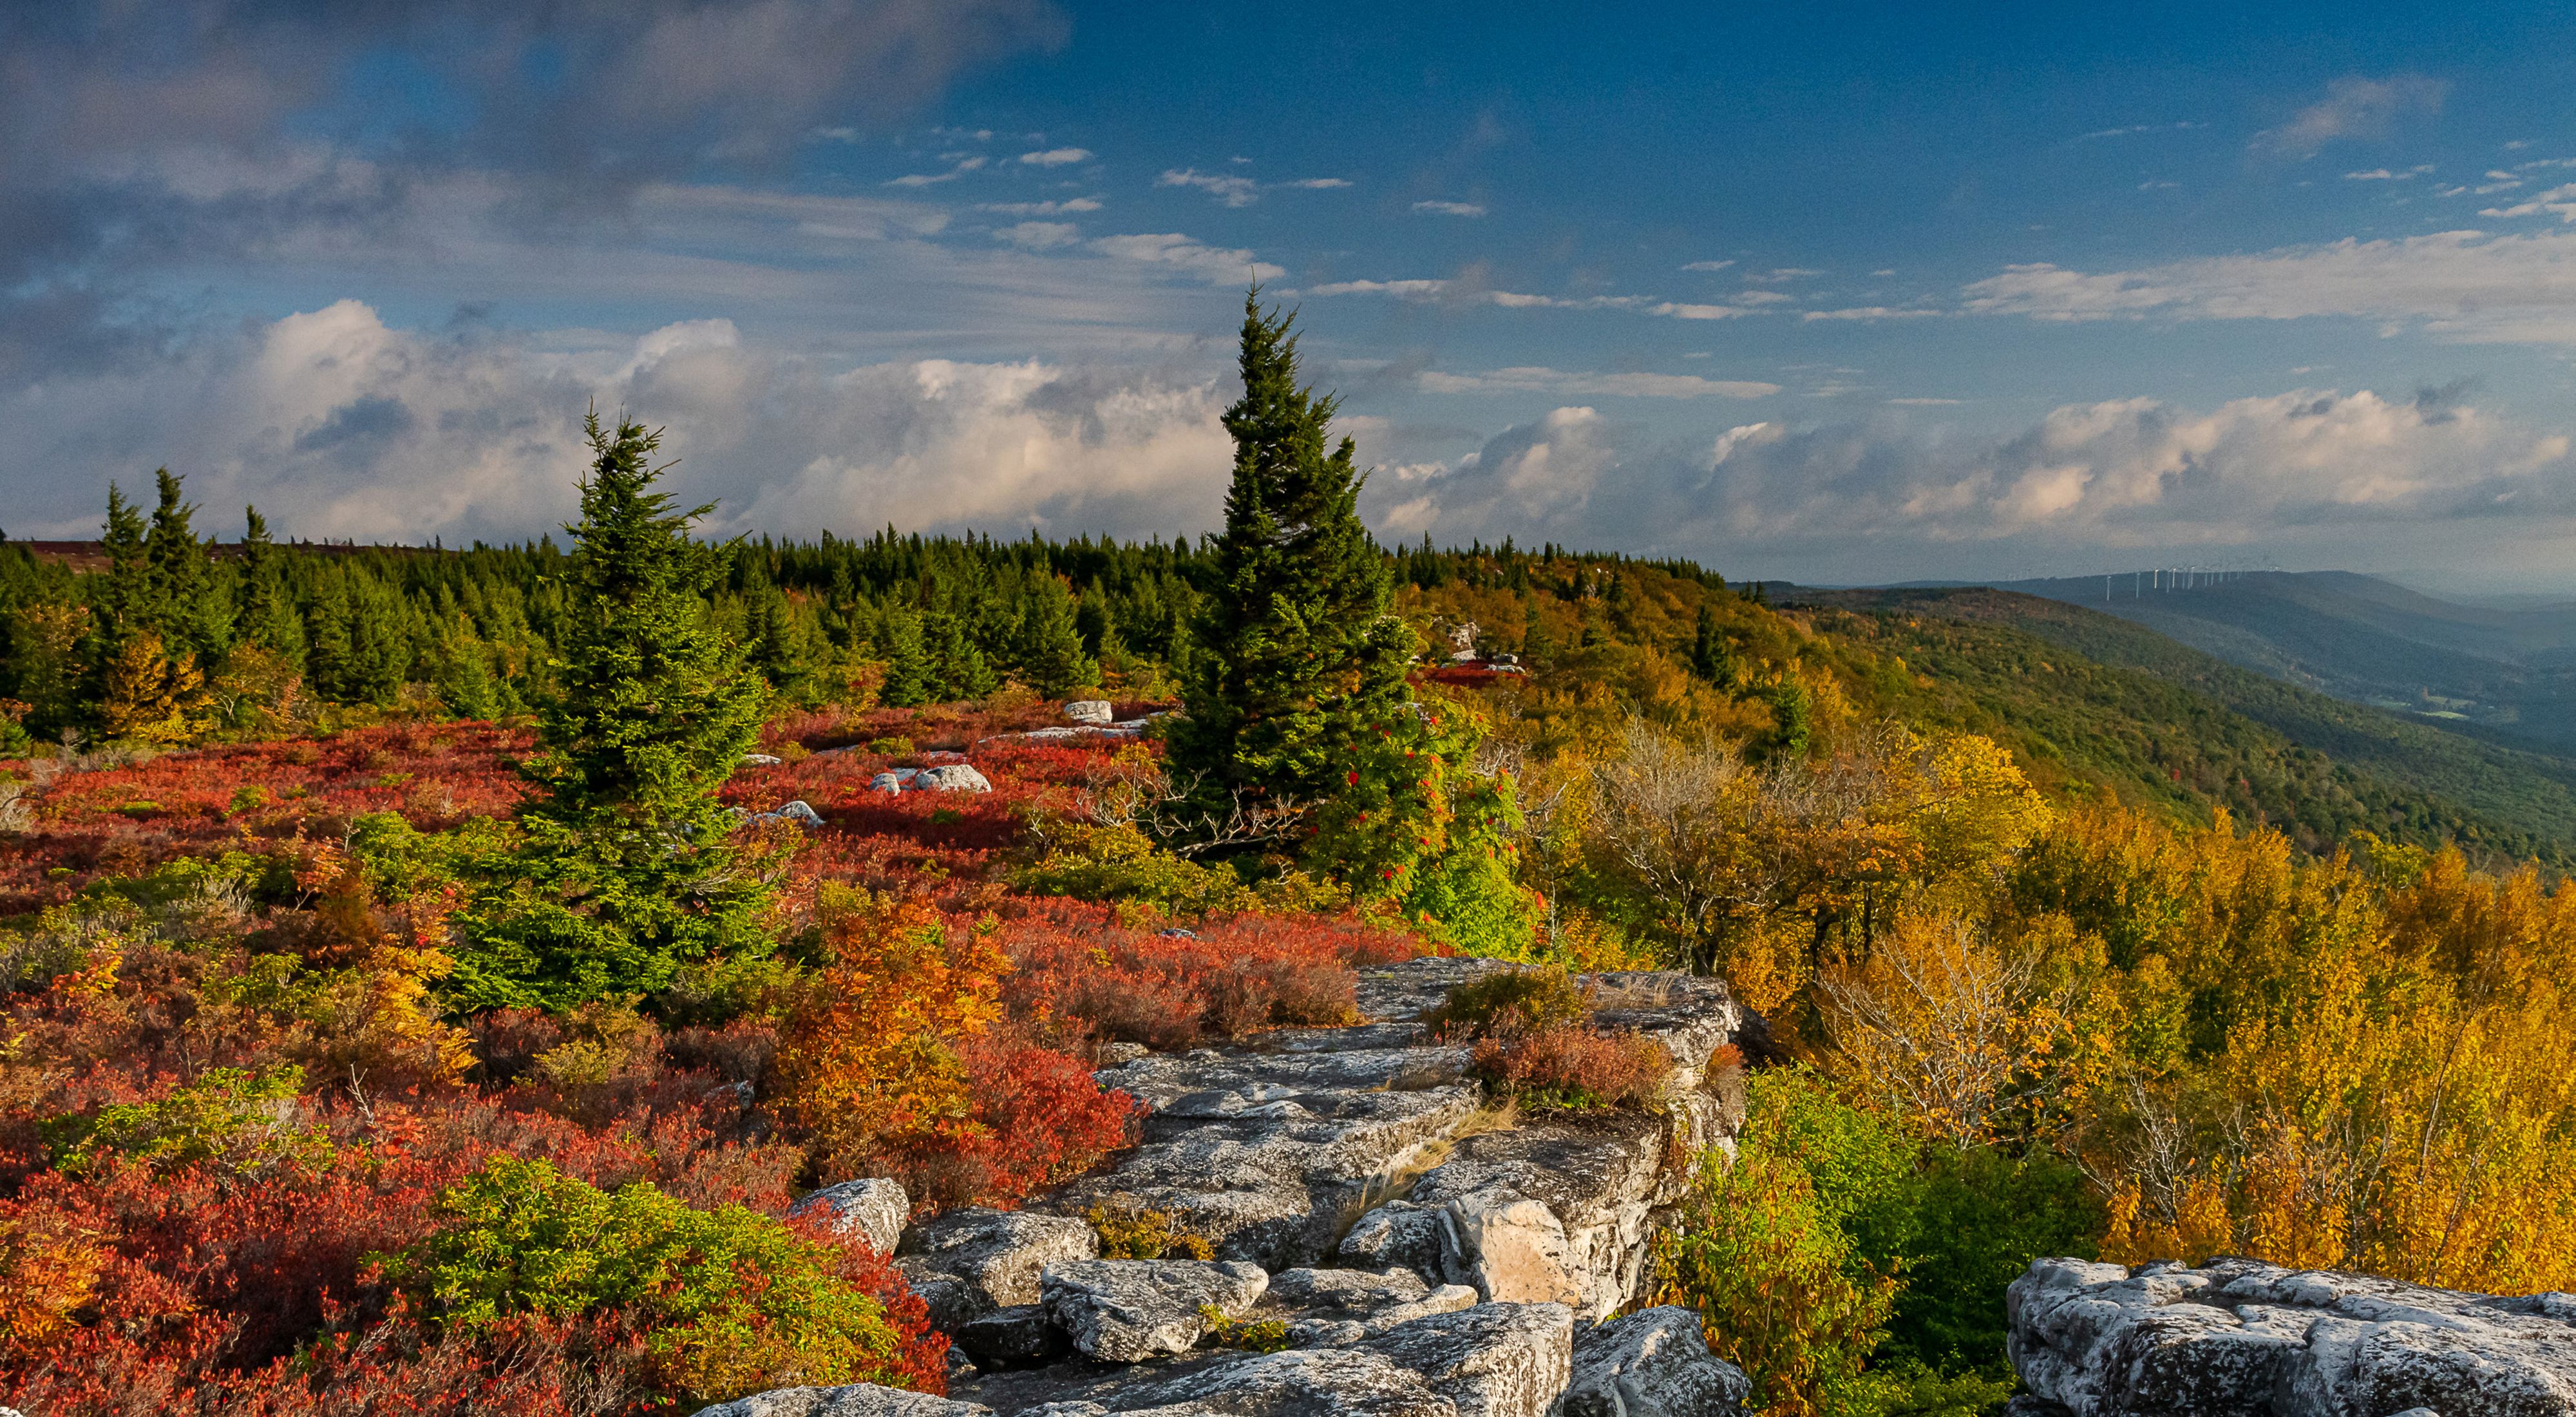 Colorful overlook of a forested landscape with rocky cliffs.